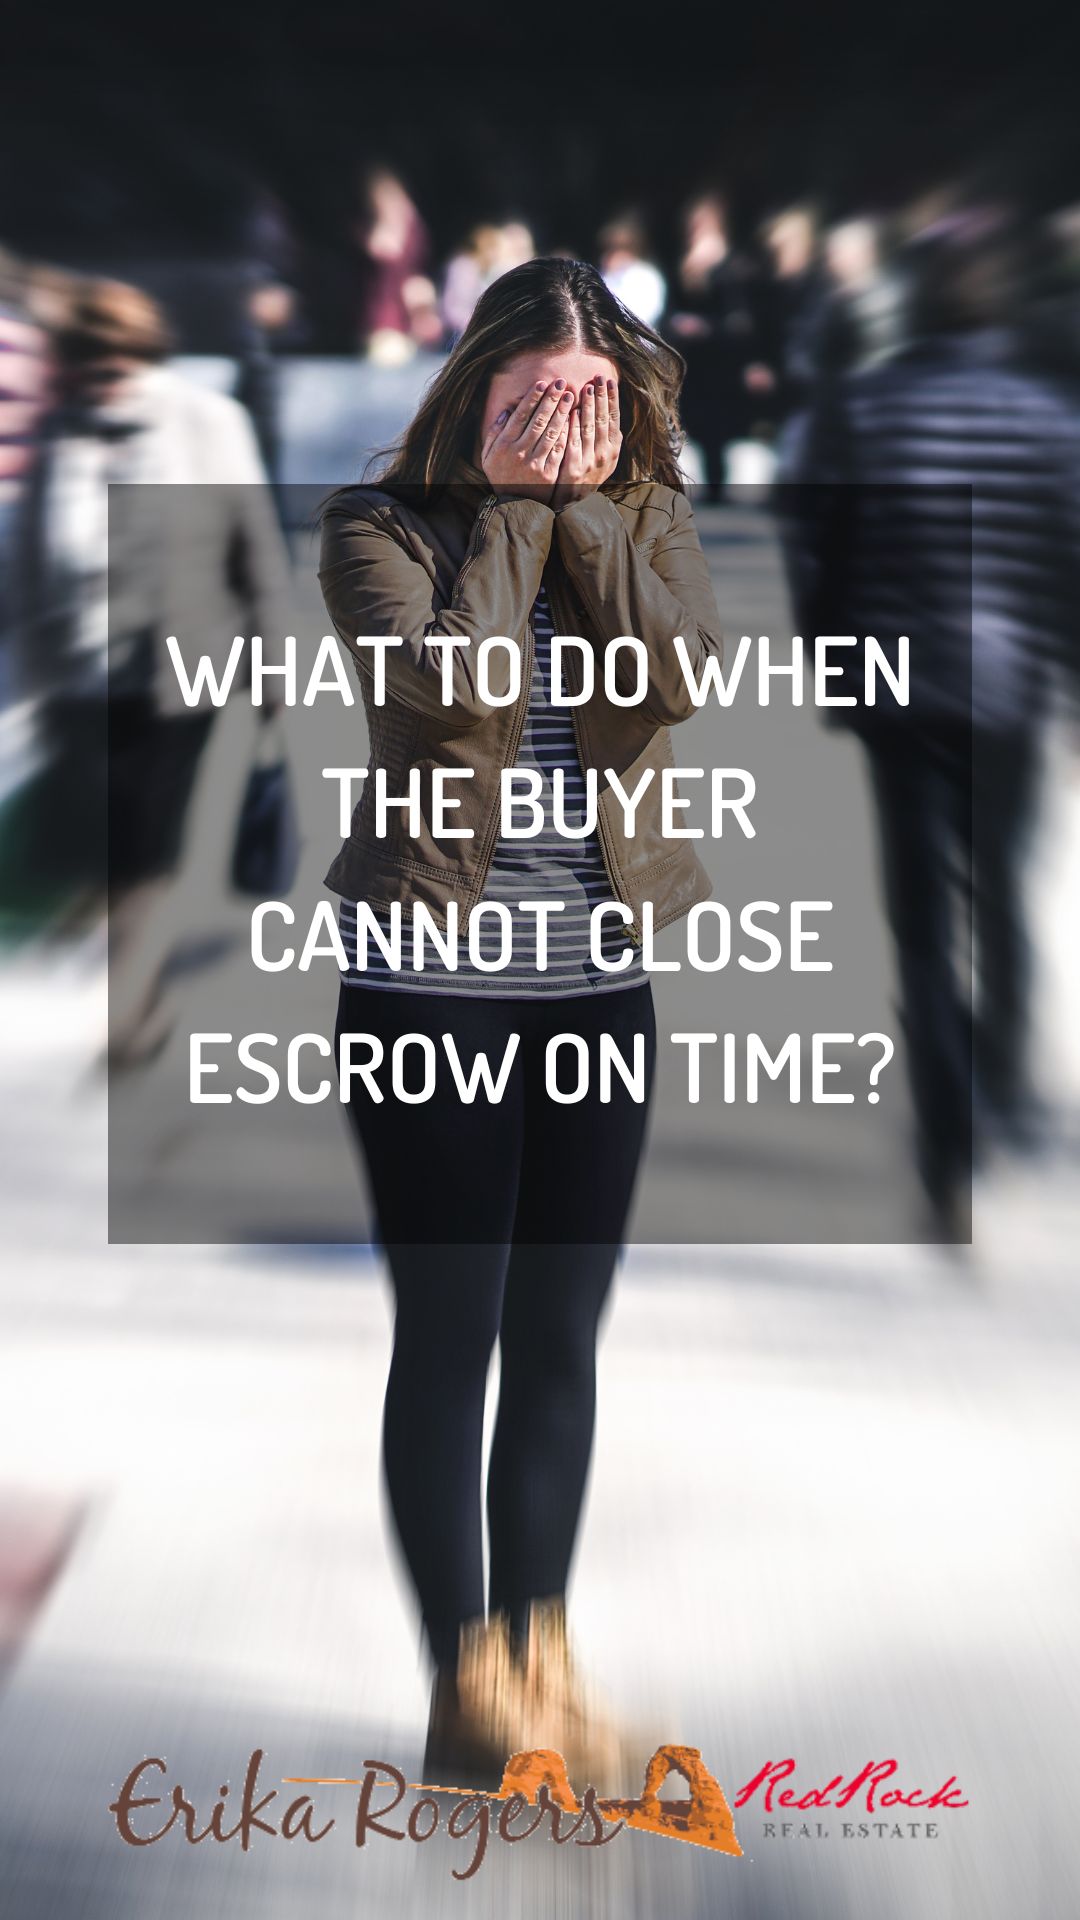 What to Do When the Buyer Cannot Close Escrow on Time